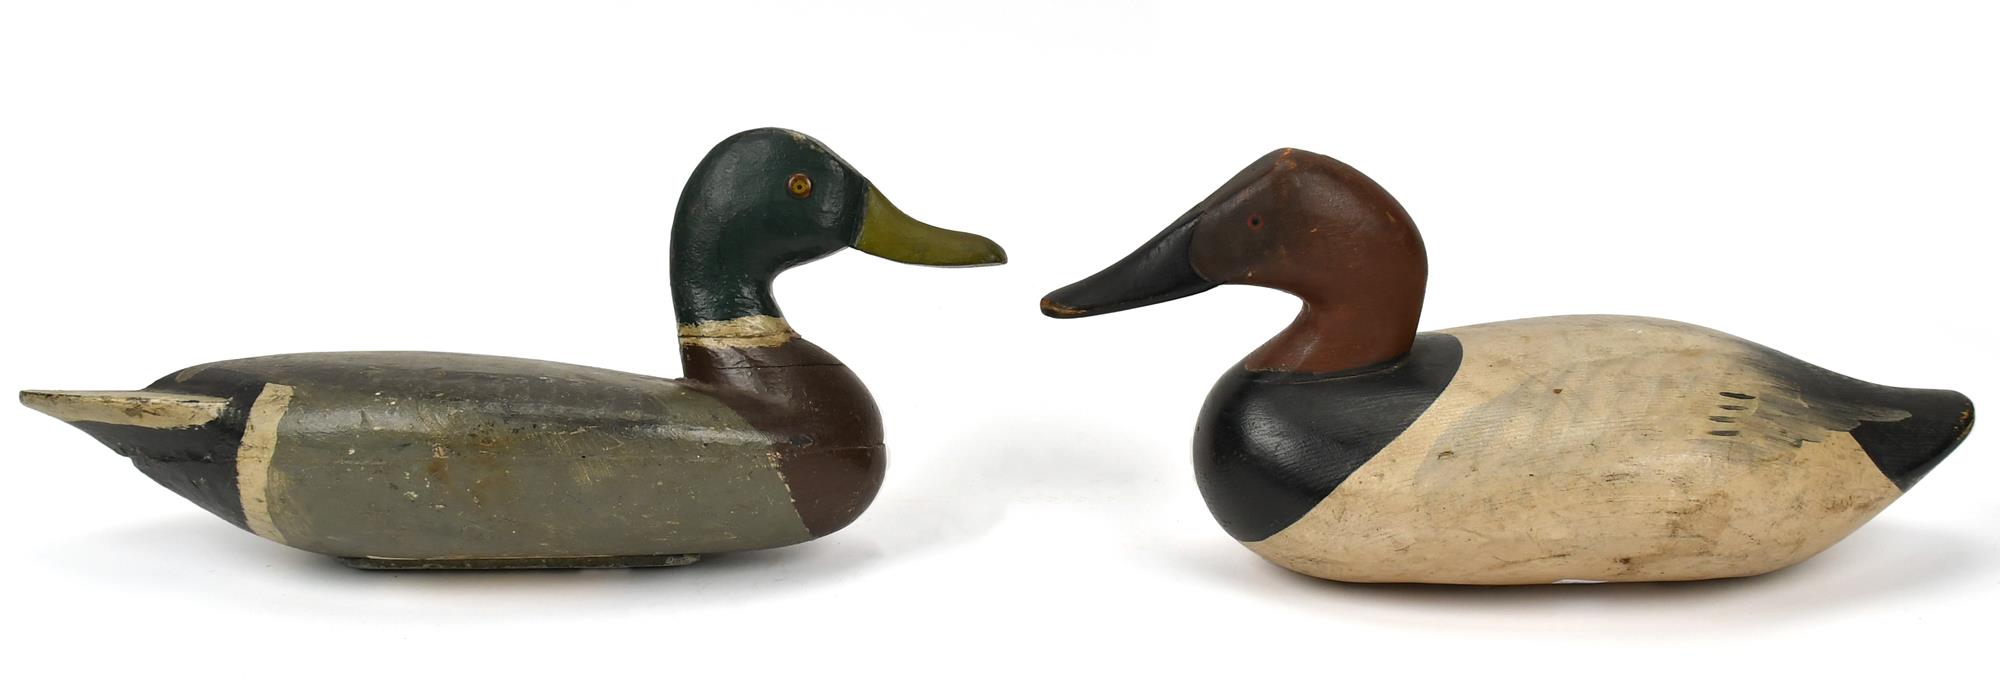 TWO DUCK DECOYS. Canvasback duck